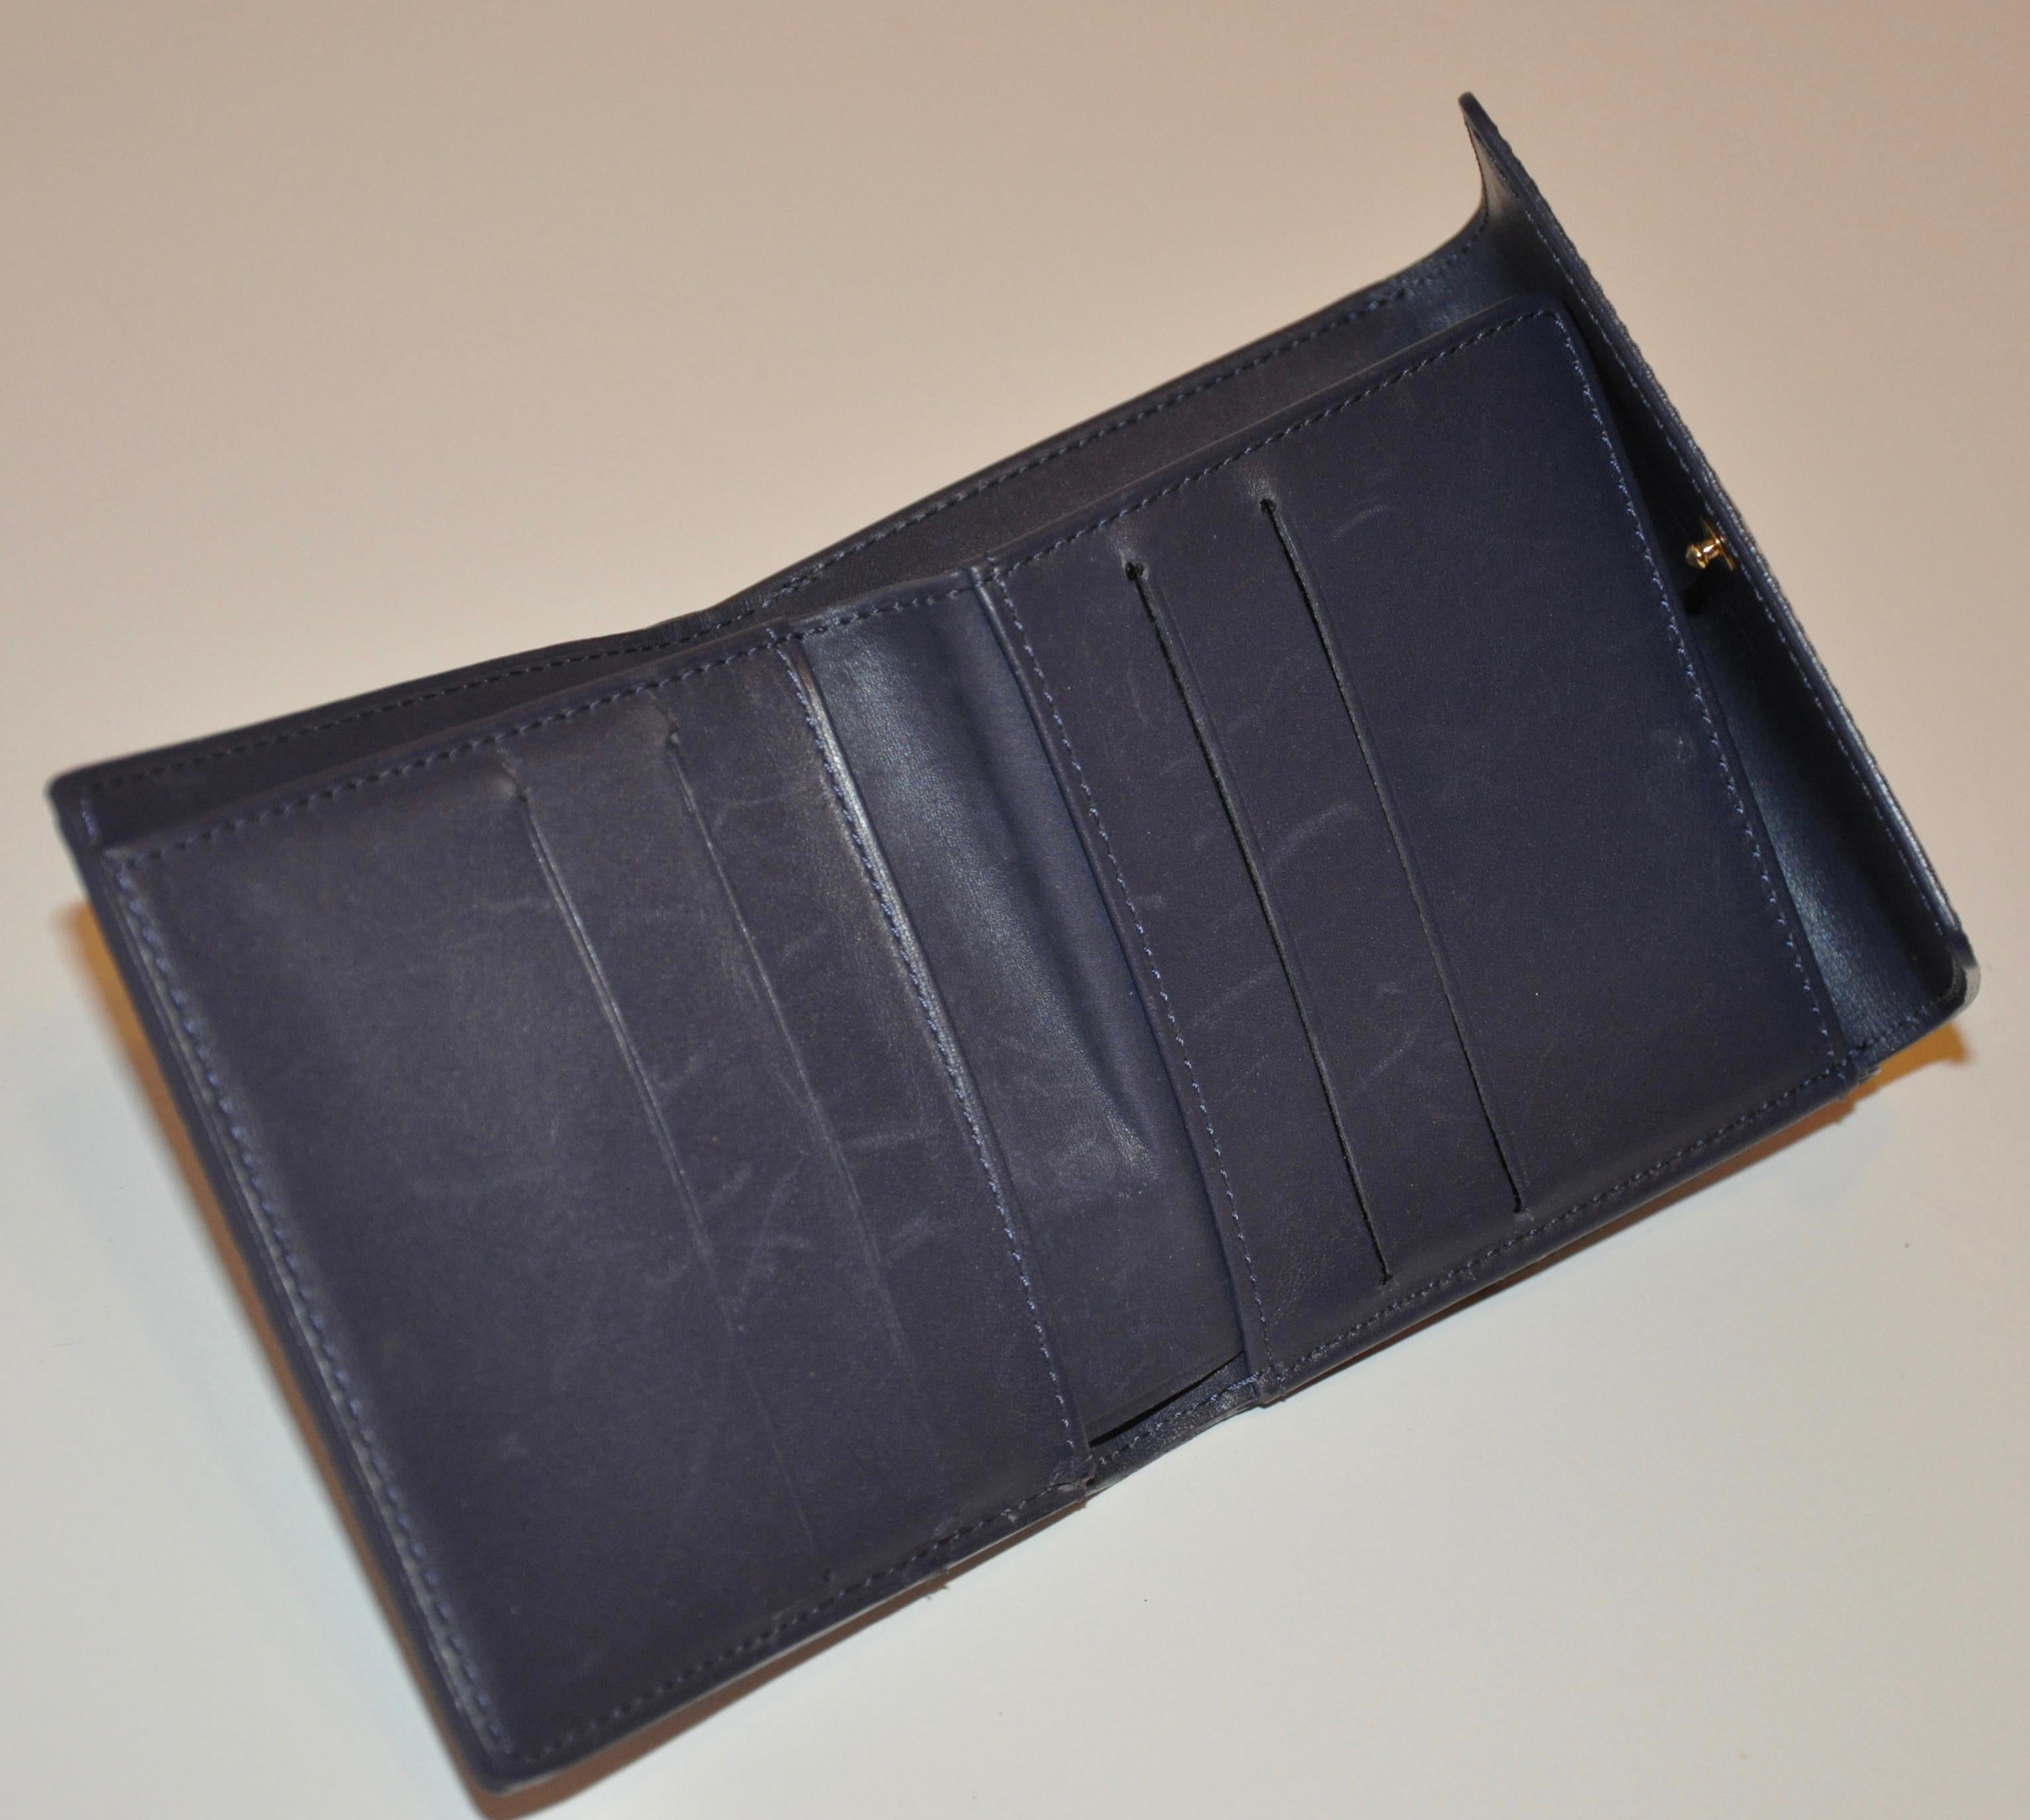 comically large wallet